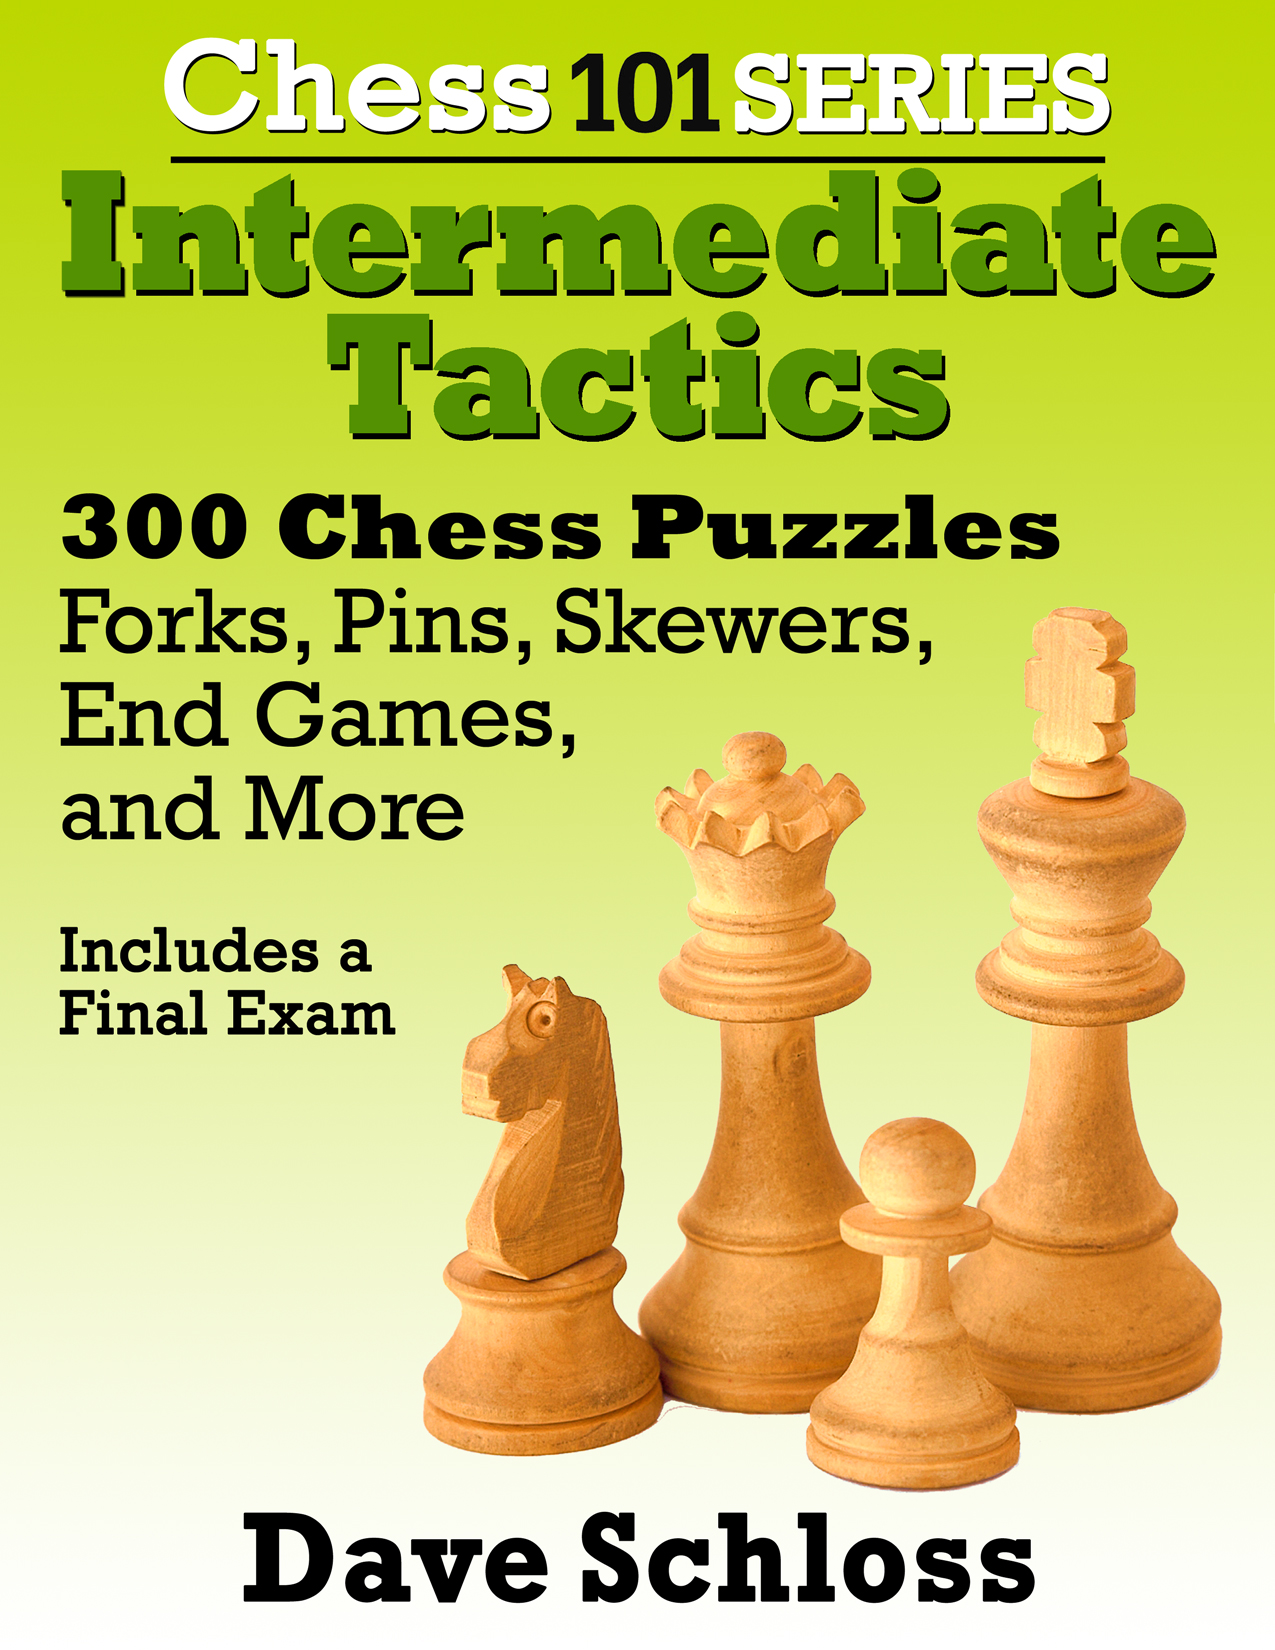 300 chess tactics for the intermediate level chess player.